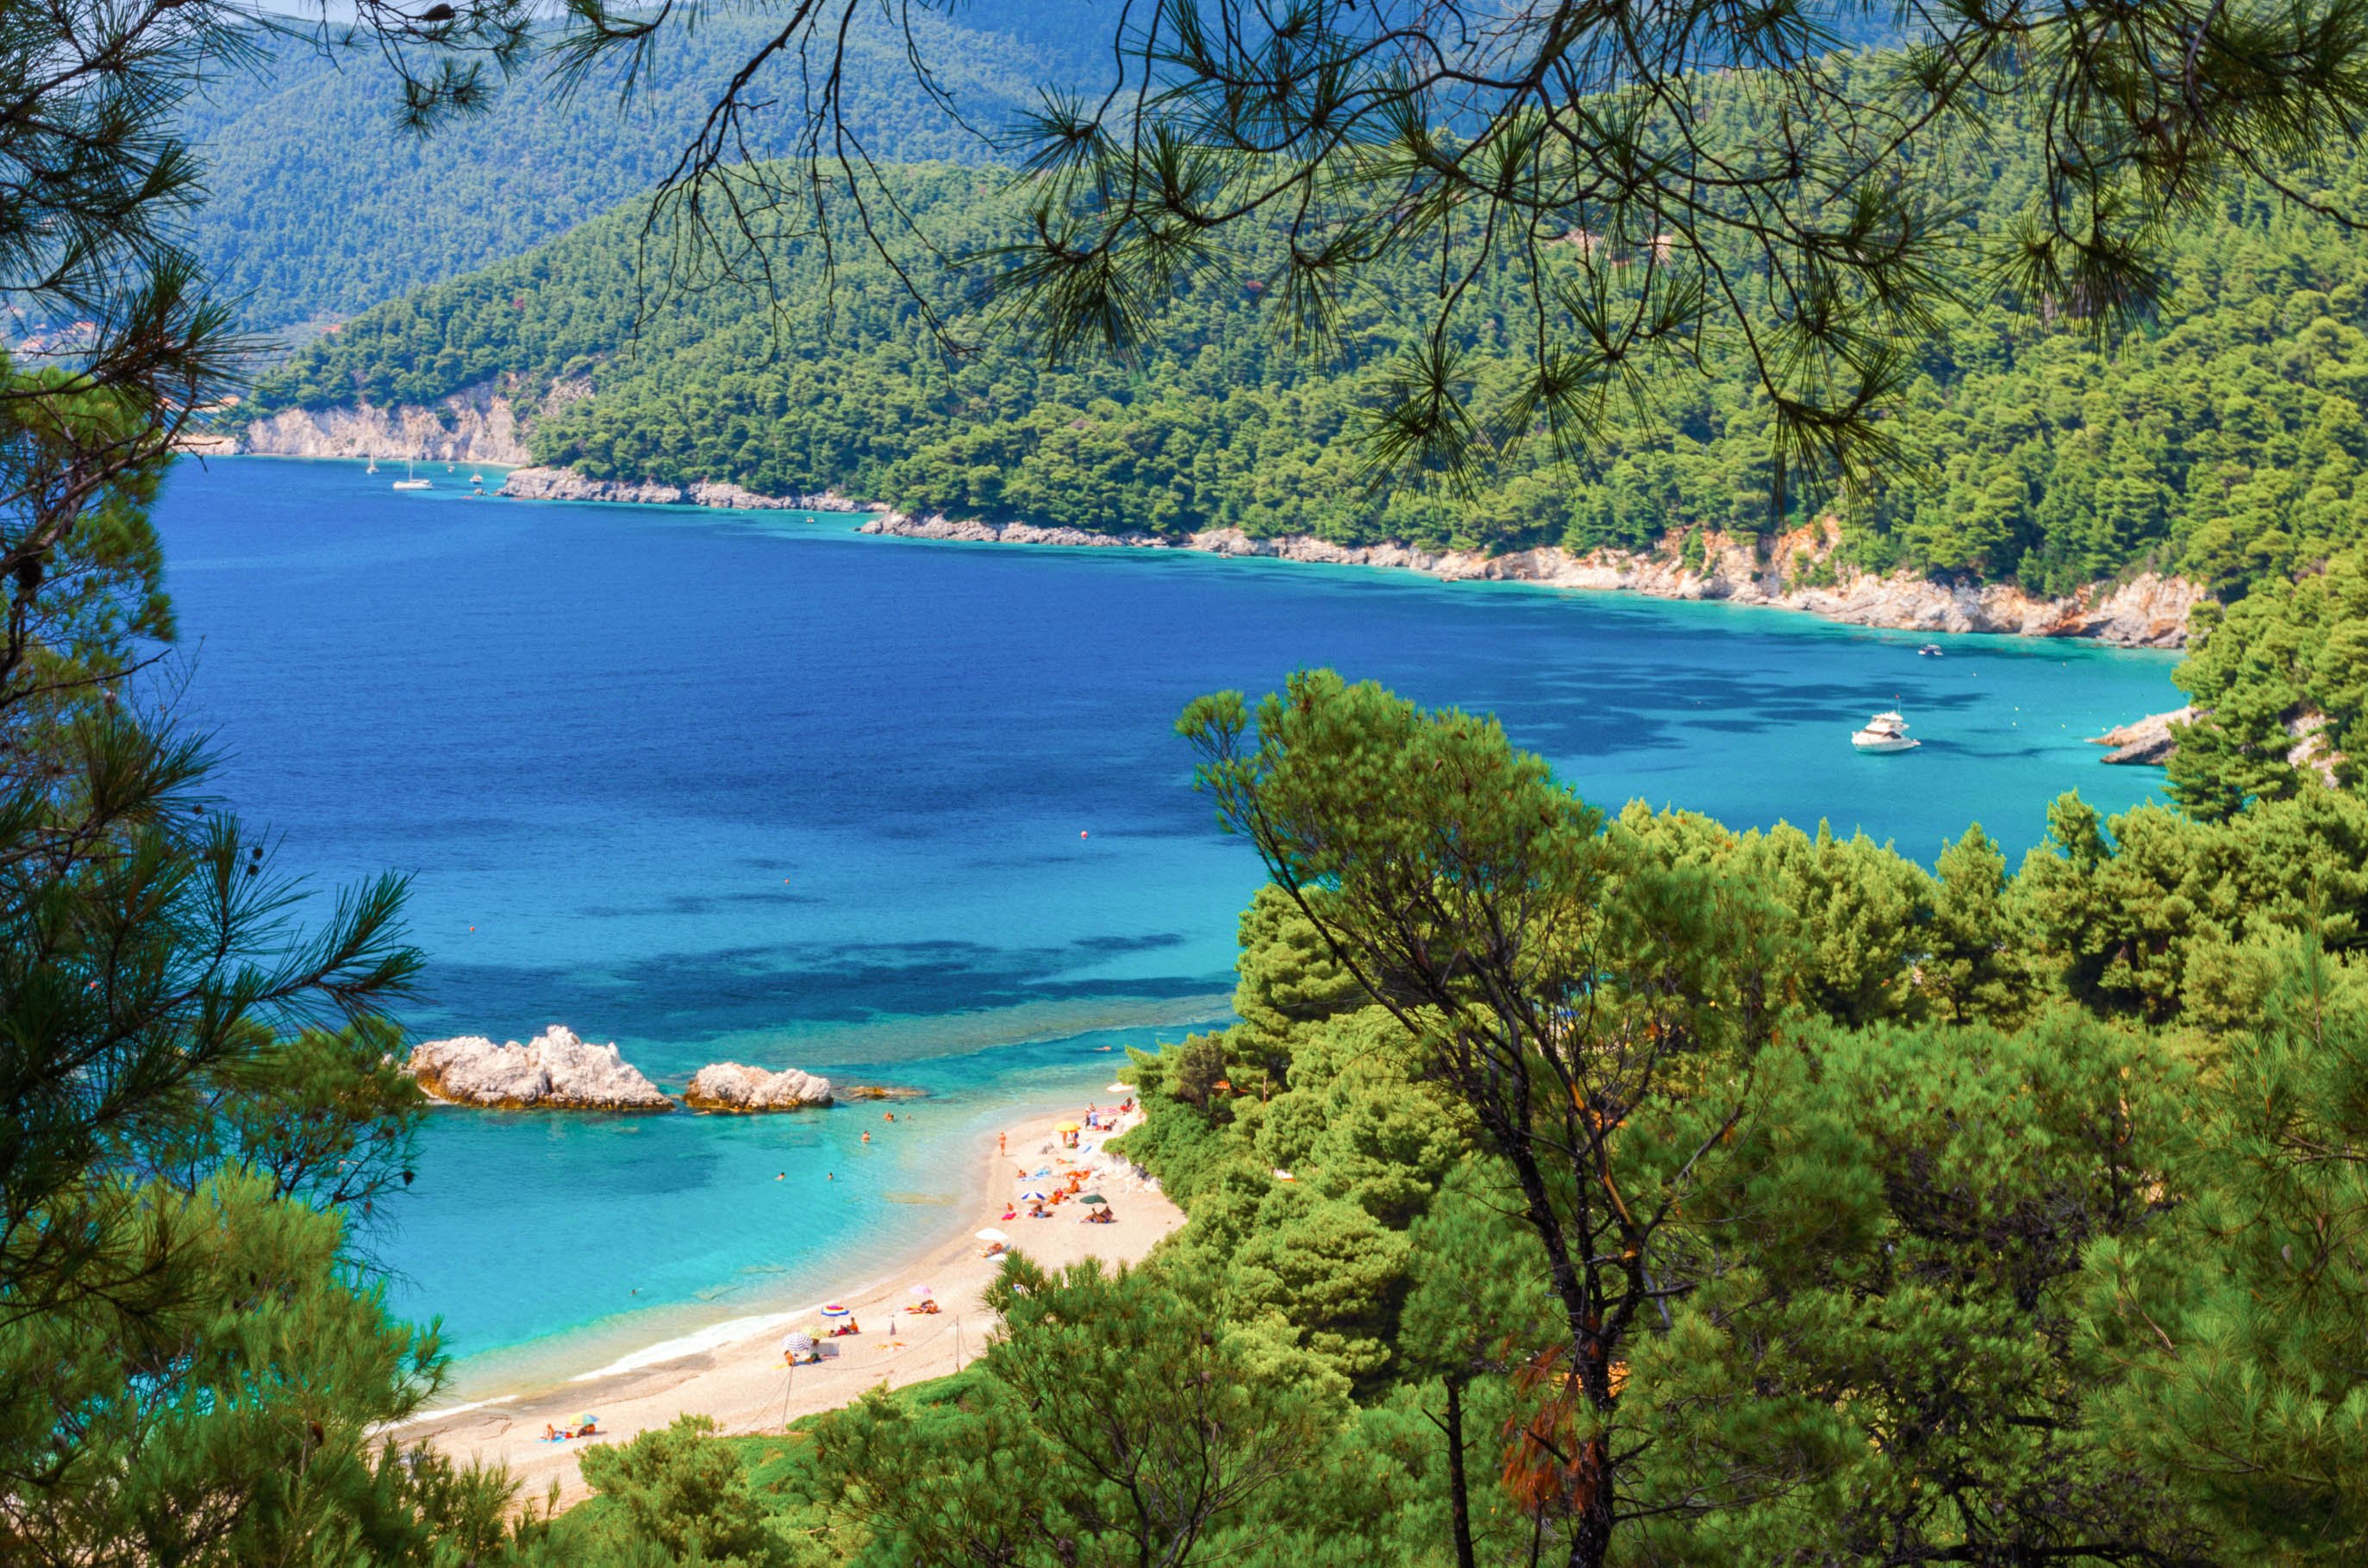 Skopelos’ Milia beach surrounded by pine trees